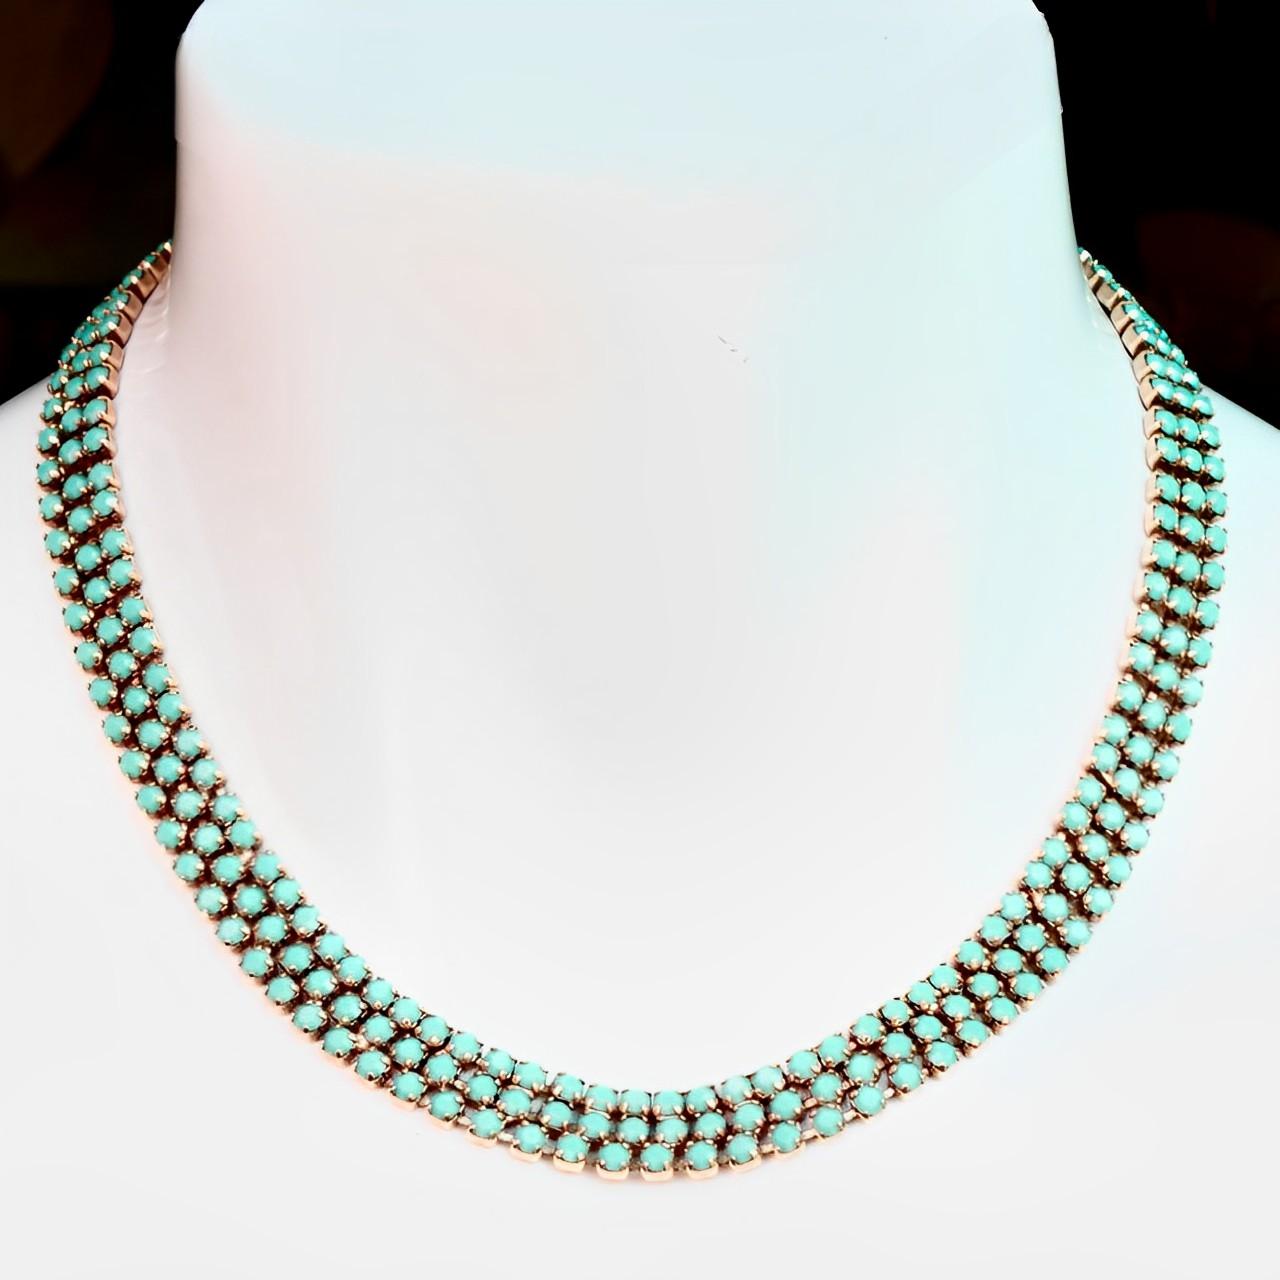 Gold Plated Three Row Faux Turquoise Glass Necklace circa 1970s For Sale 1